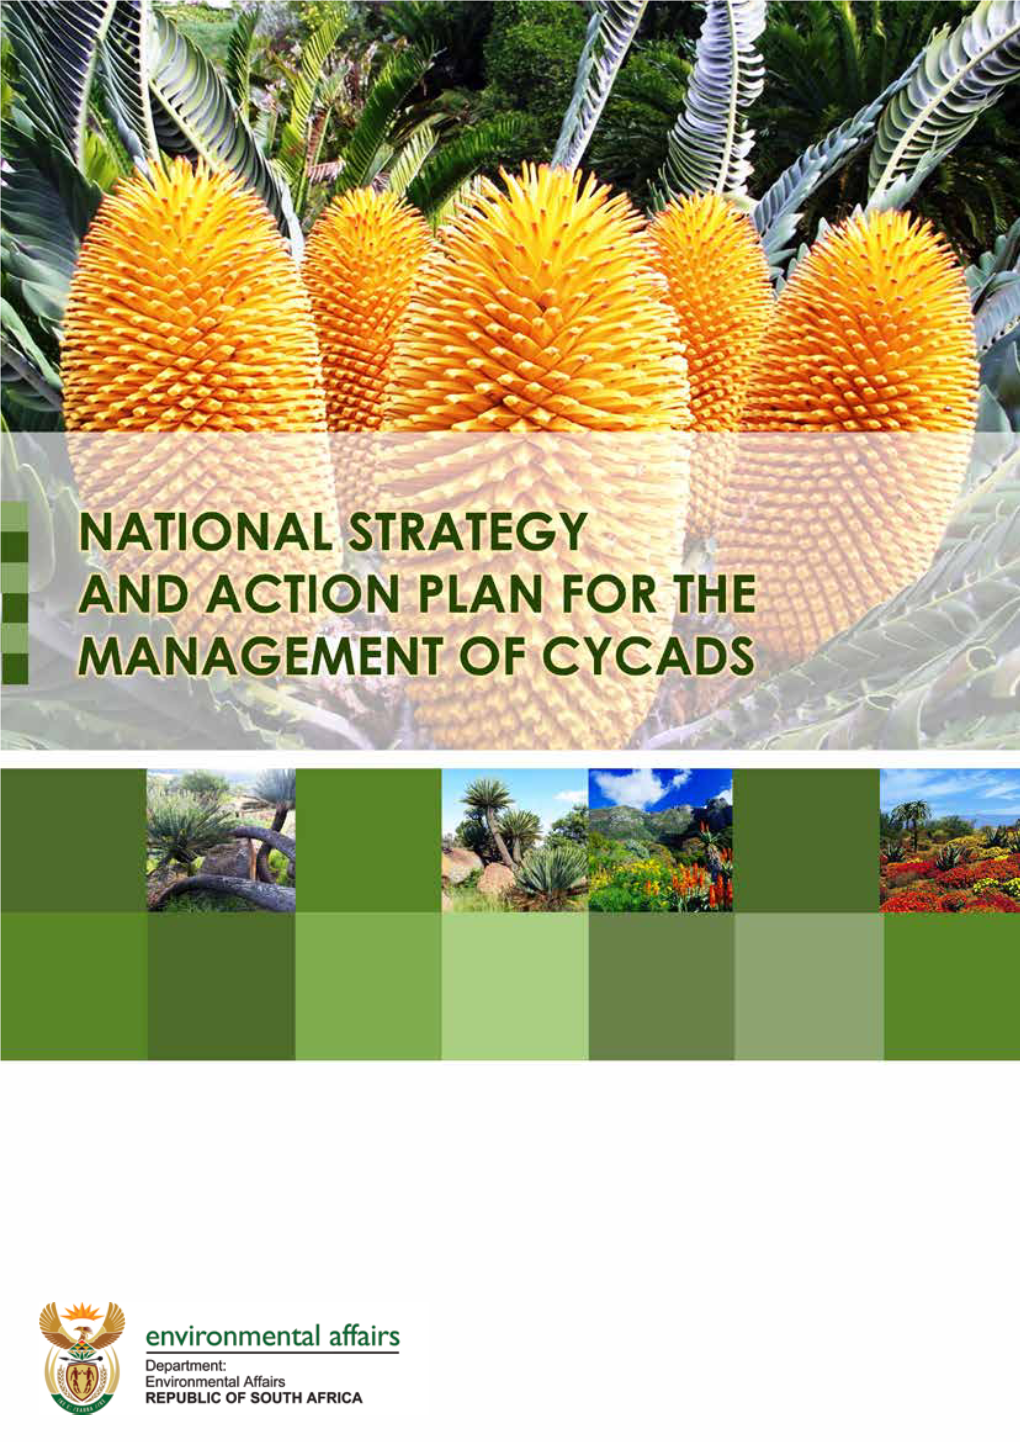 National Strategy and Action Plan for the Management of Cycads